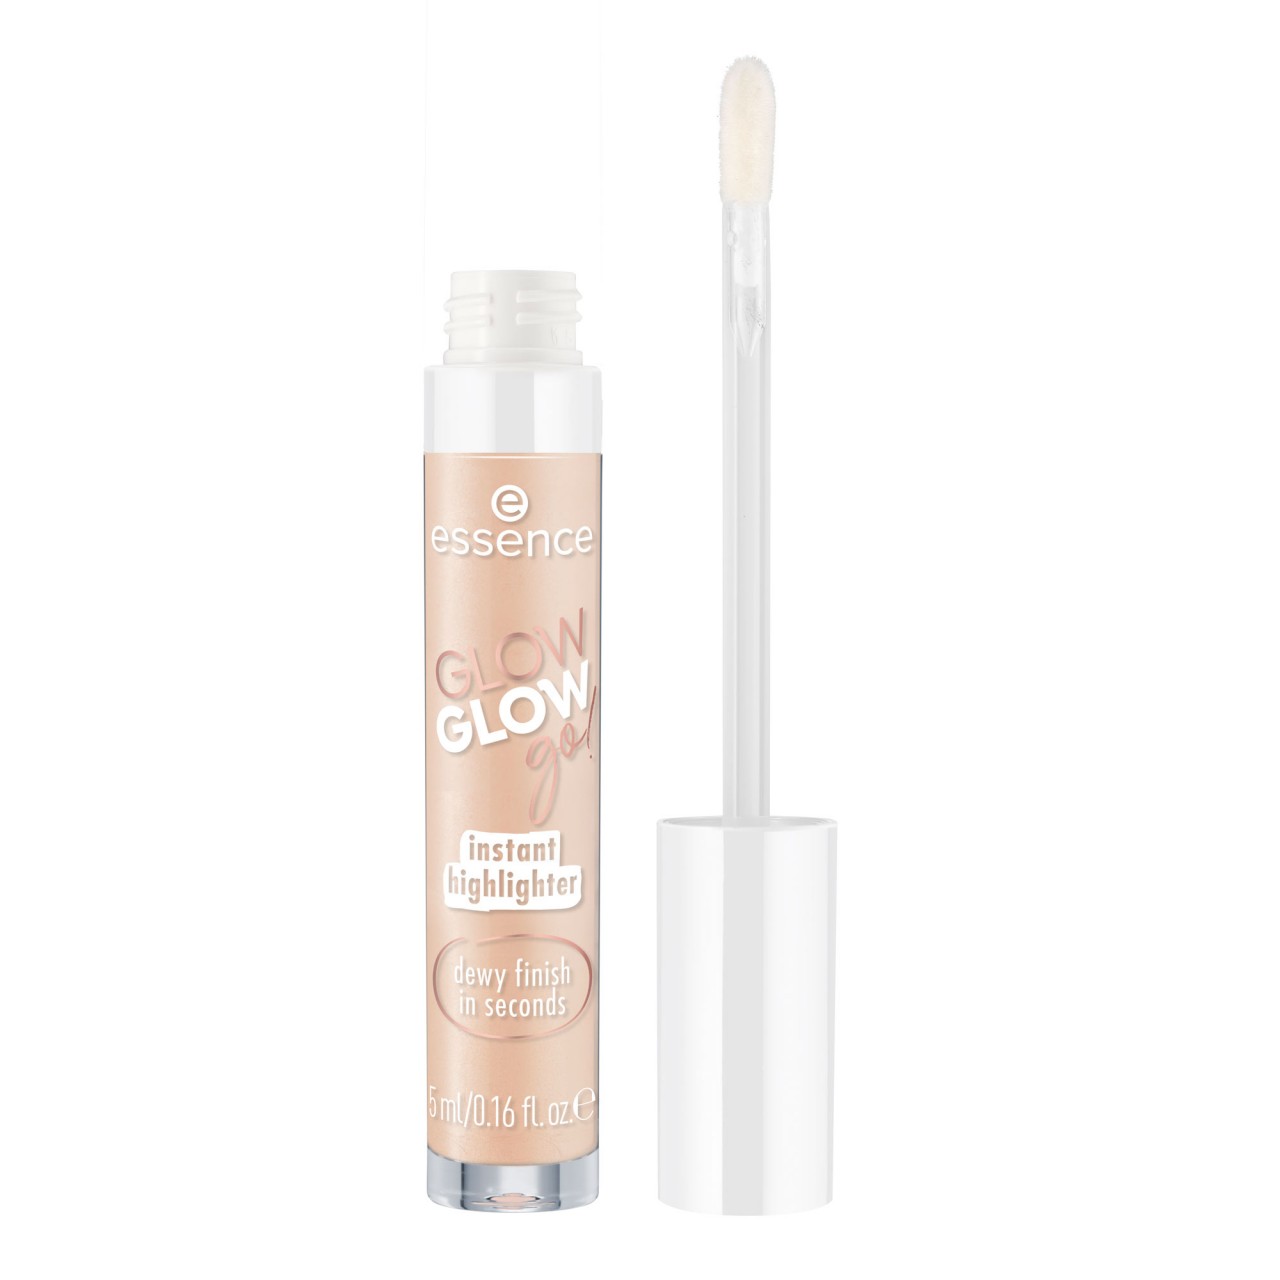 ESSENCE - Glow Glow Go! Instant Highlighter Fairy Lights - 